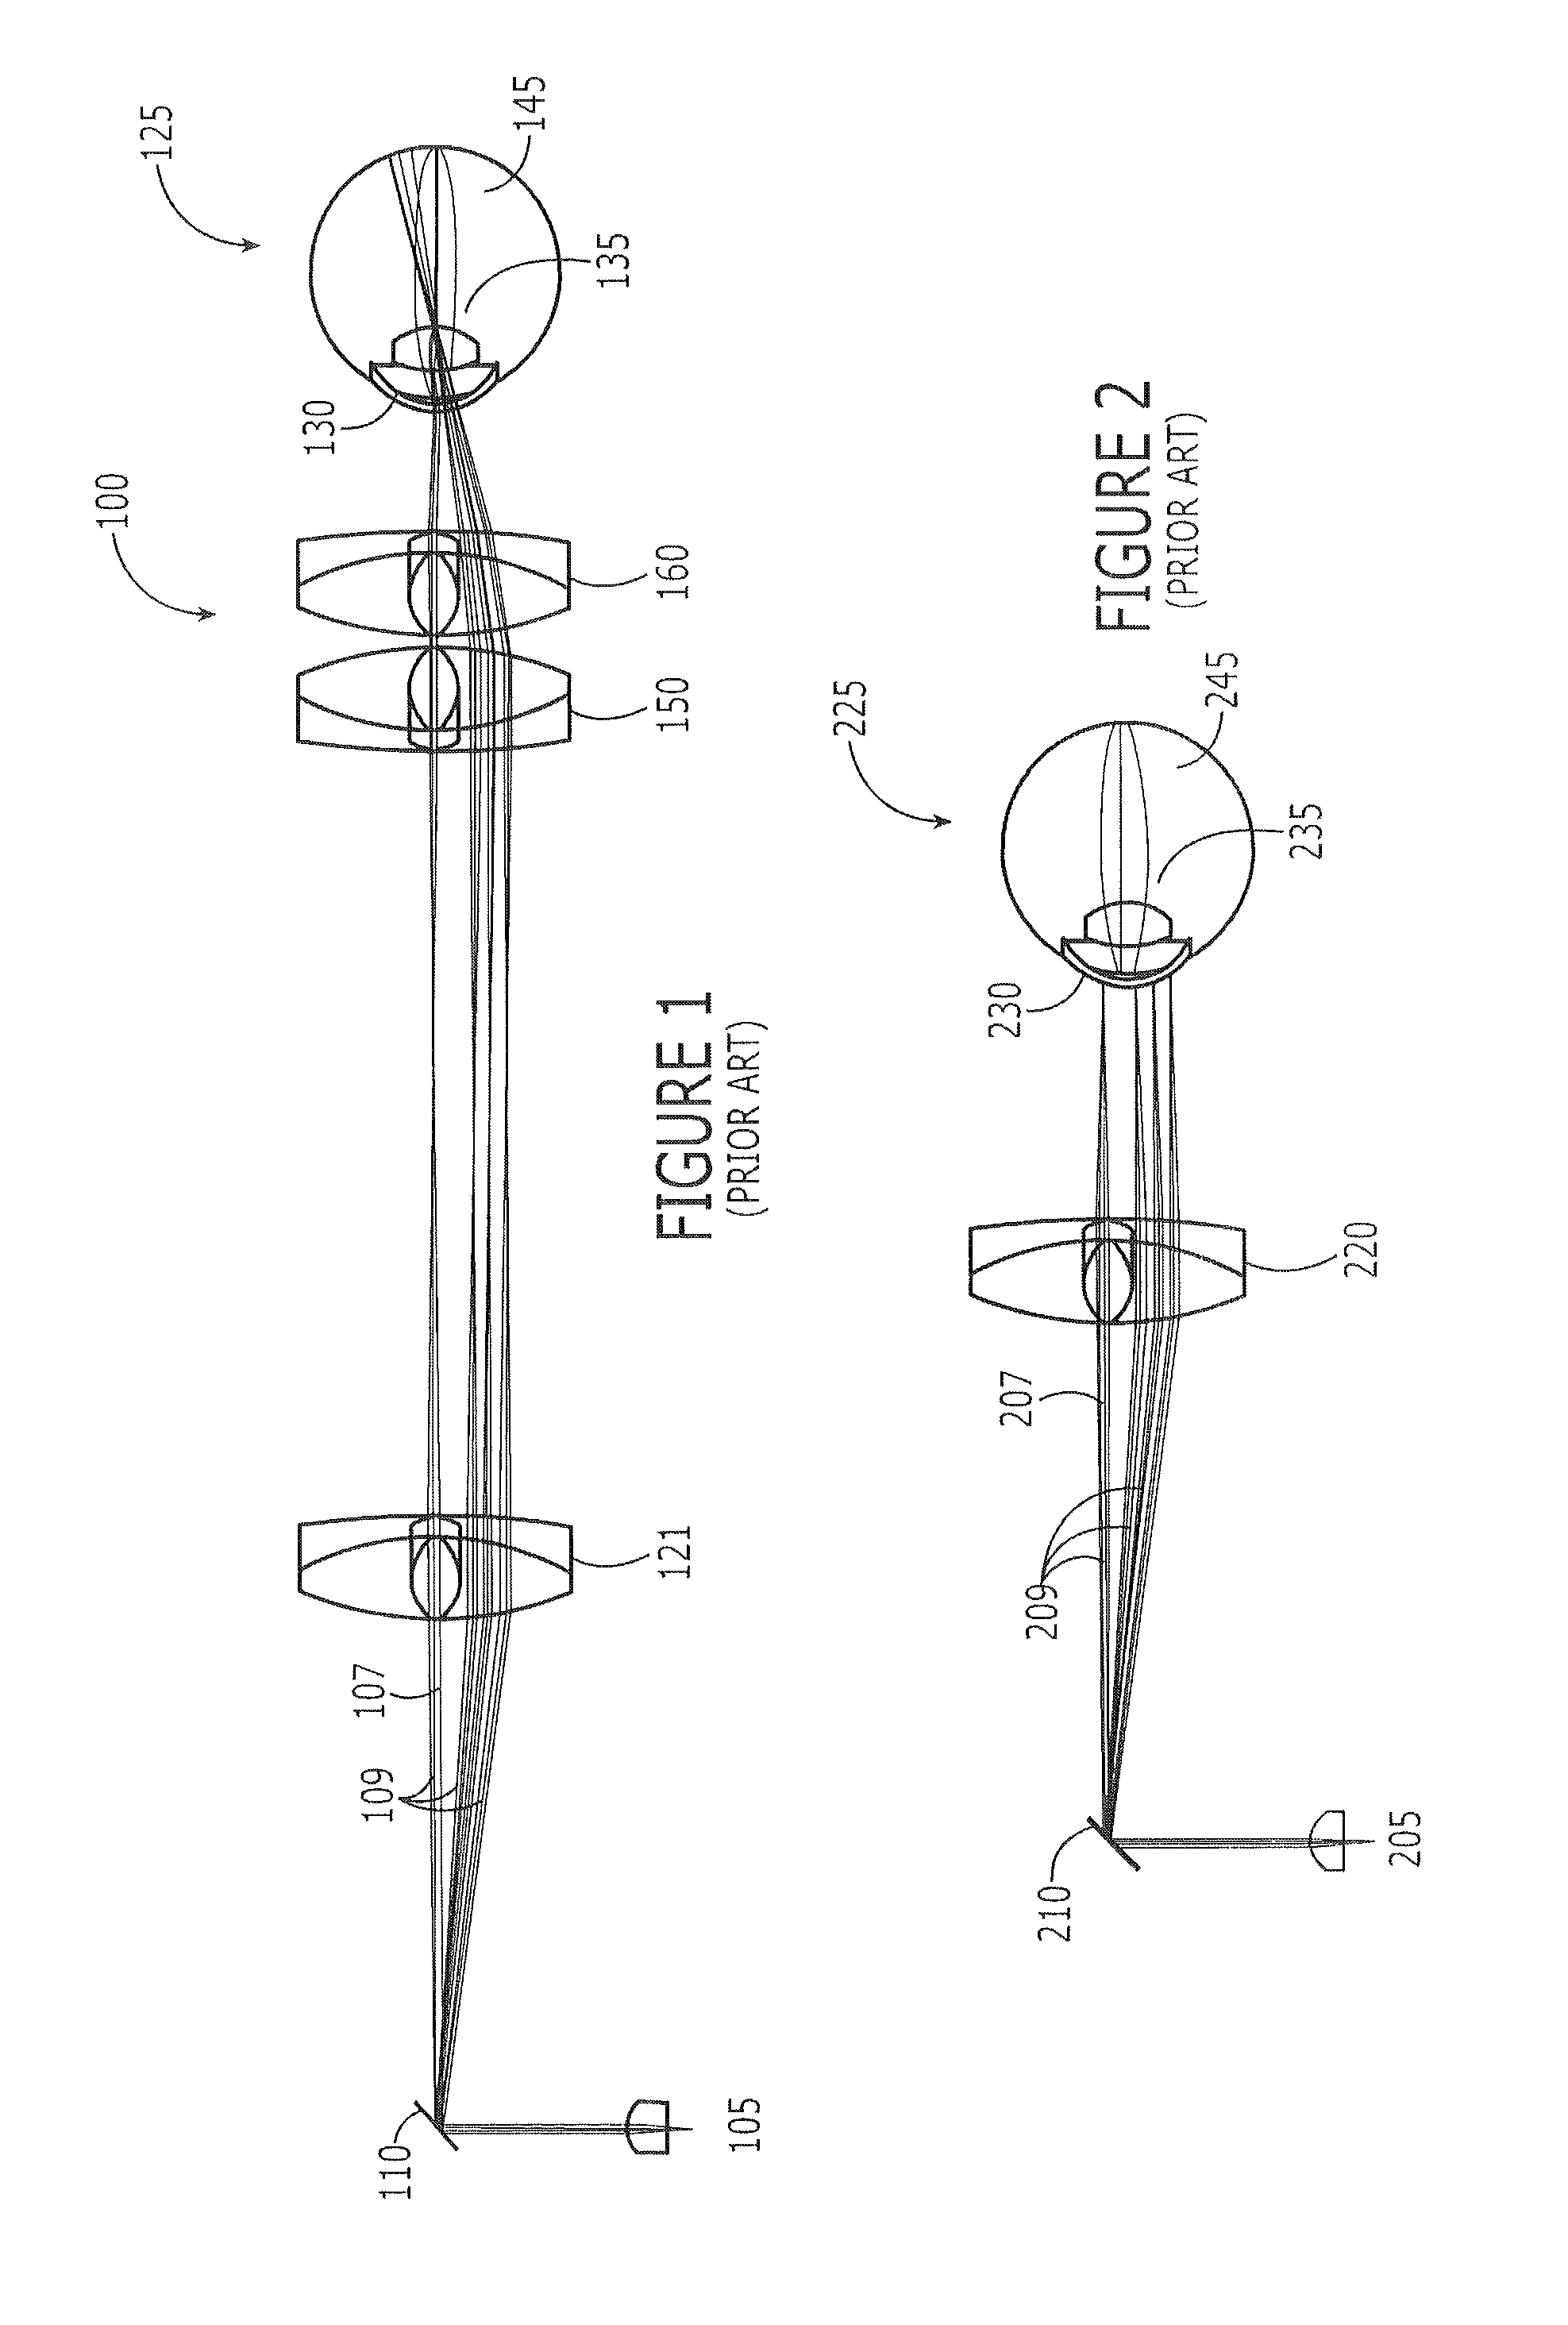 Optical coherence imaging systems having a mechanism for shifting focus and scanning modality and related adapters